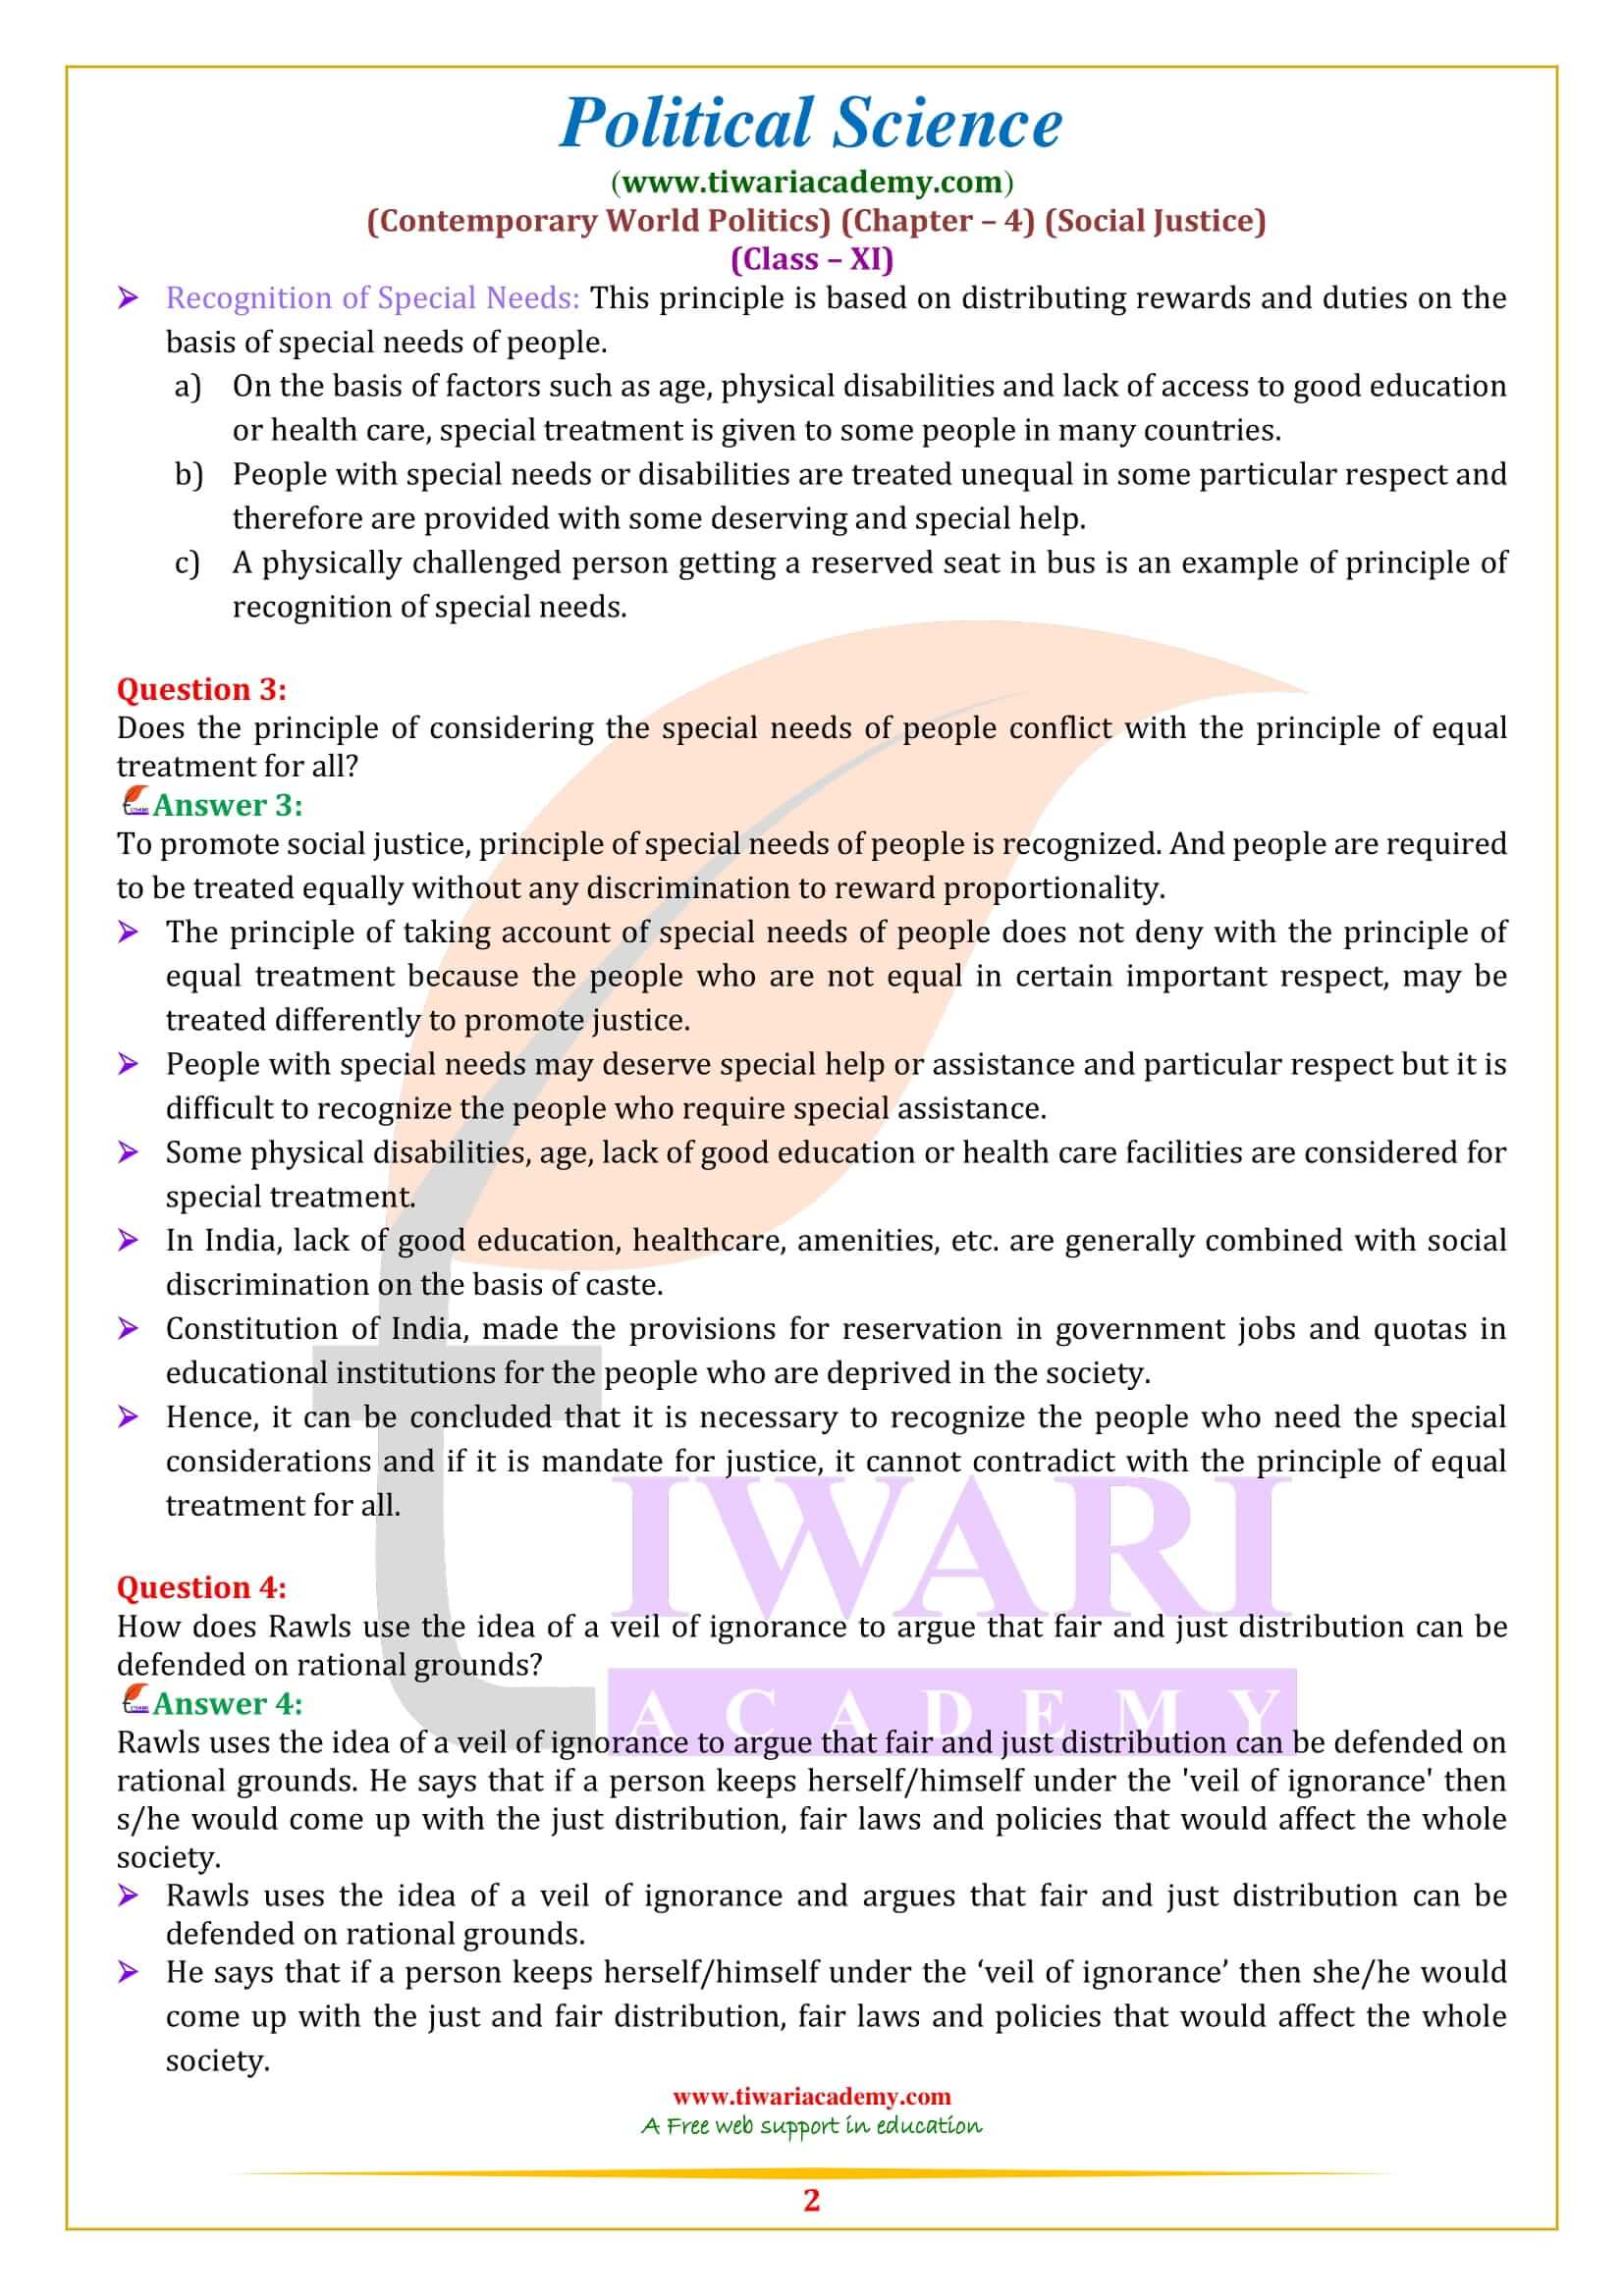 NCERT Solutions for Class 11 Political Science Chapter 4